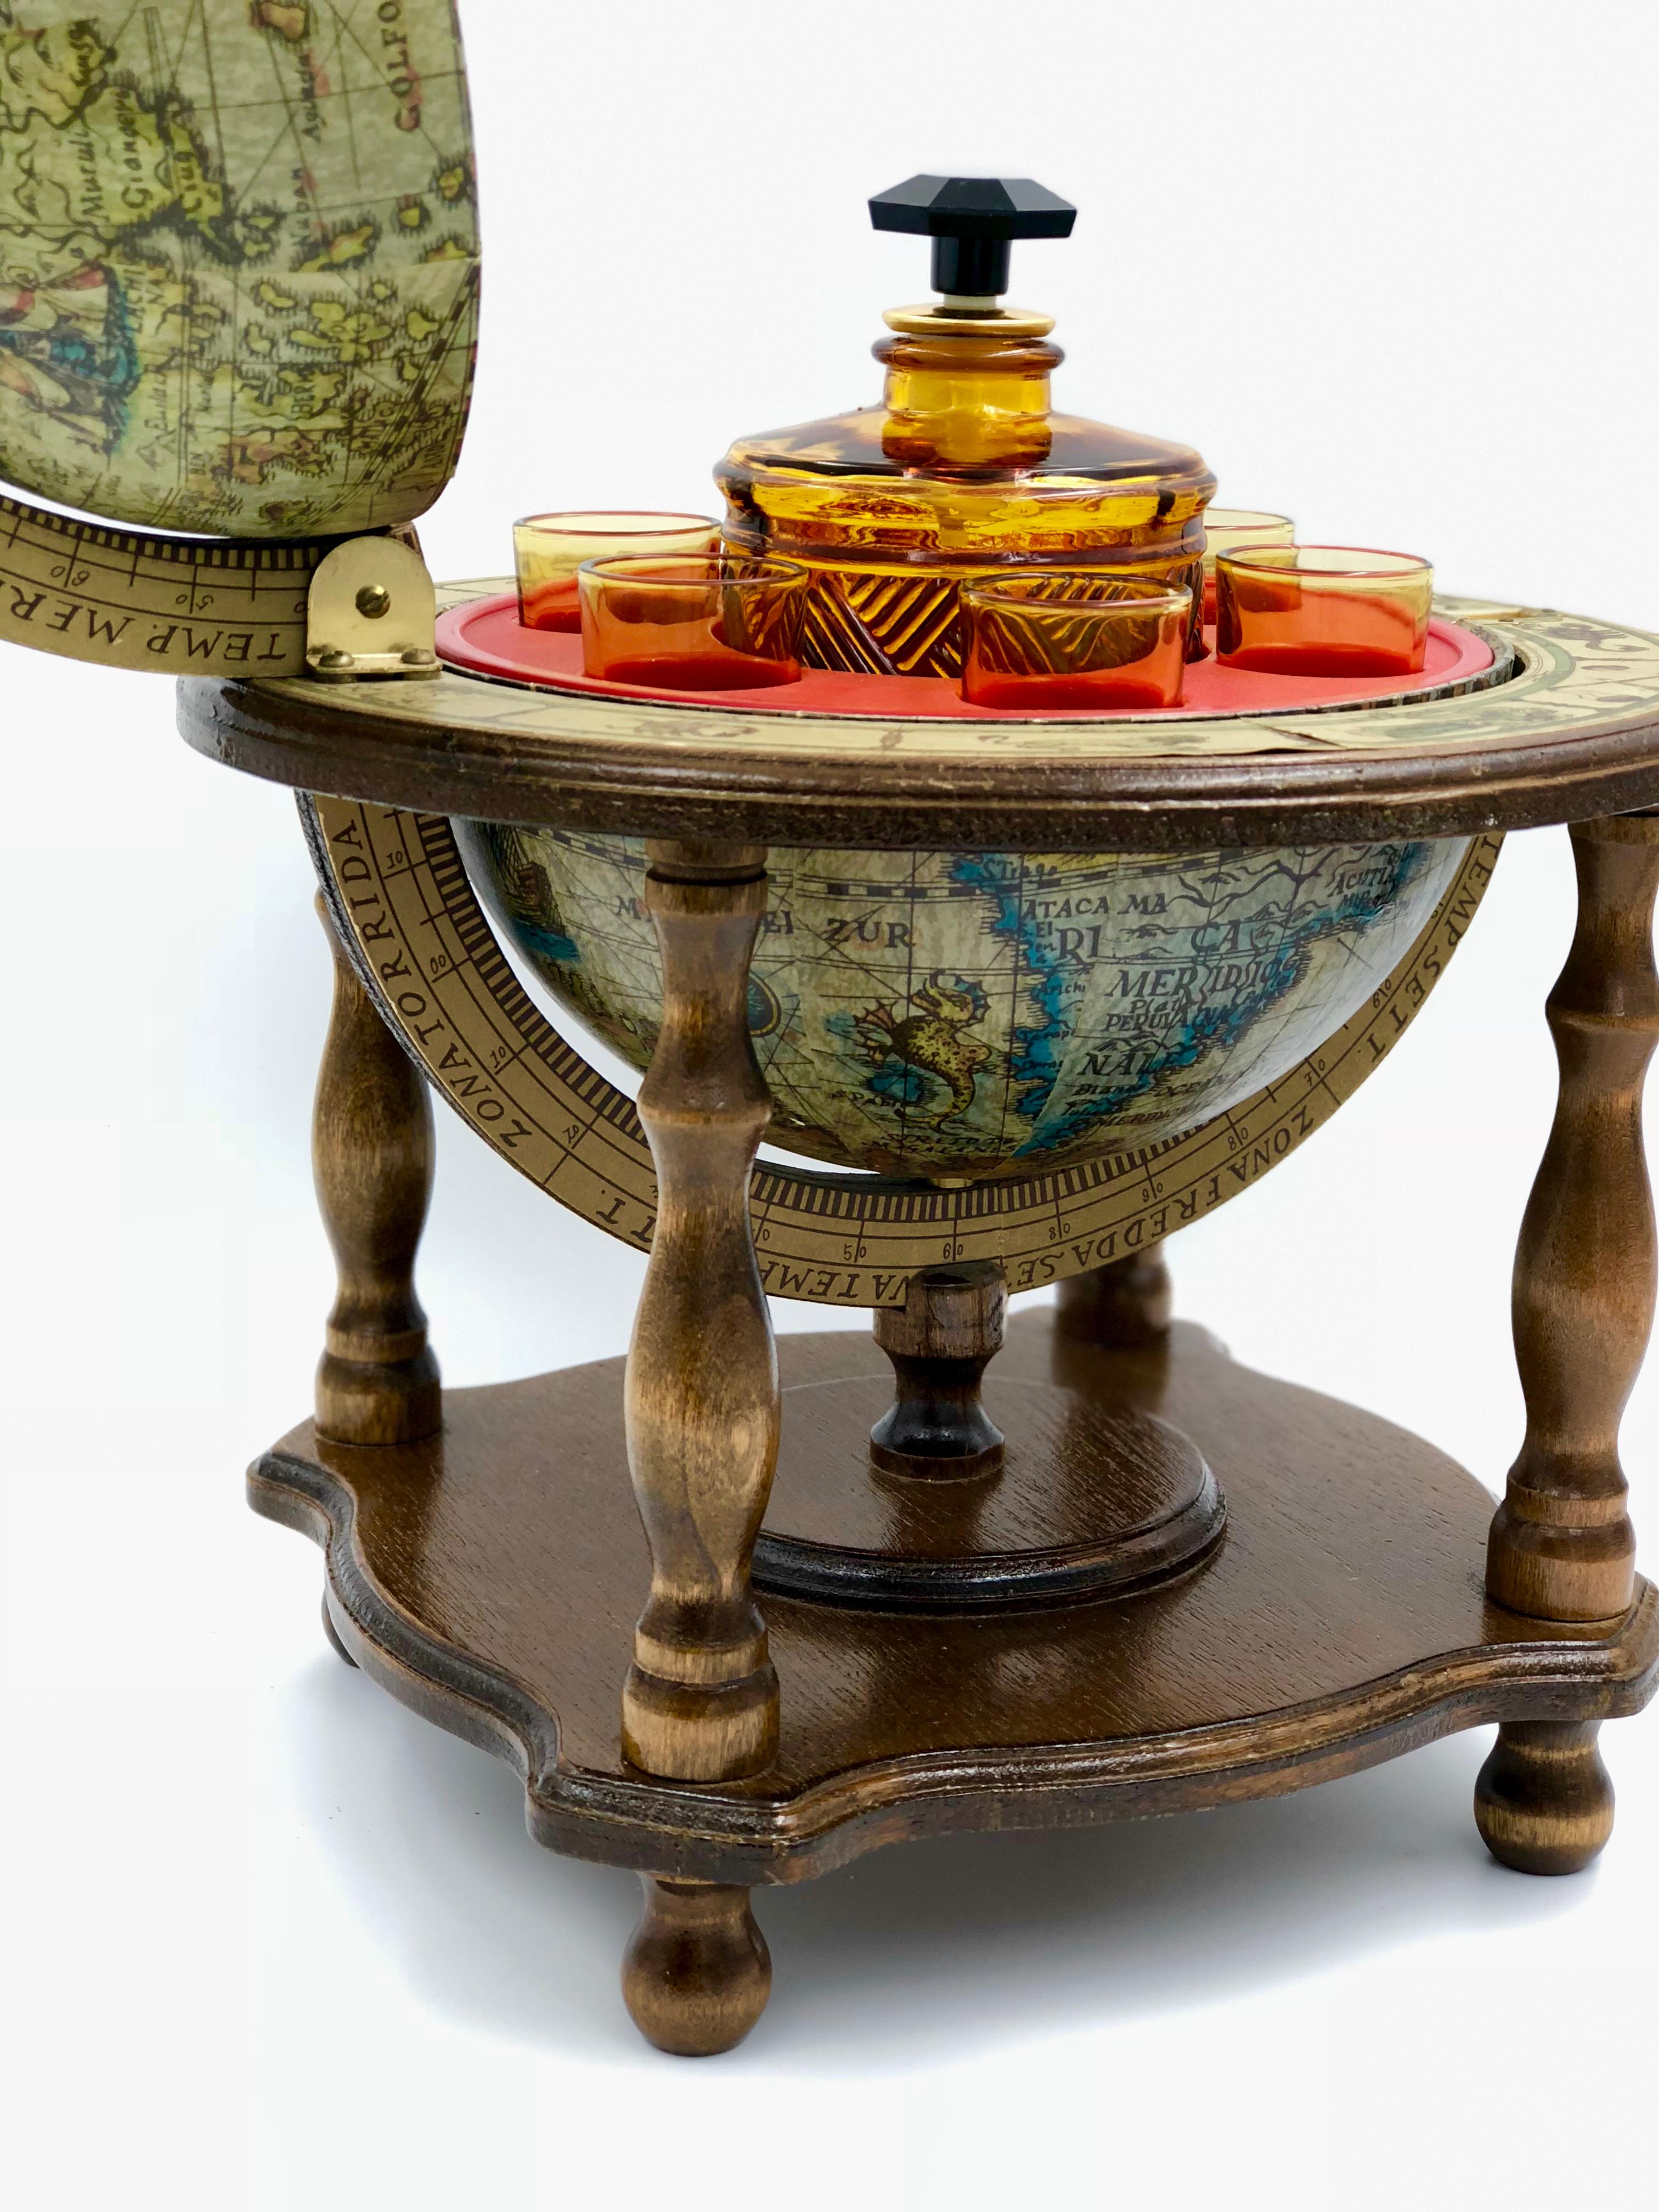 20th century spinning globe on a wooden platform base with turned legs. The globe opens to reveal an inner compartment containing an amber colored decanter and six matching cordial glasses.